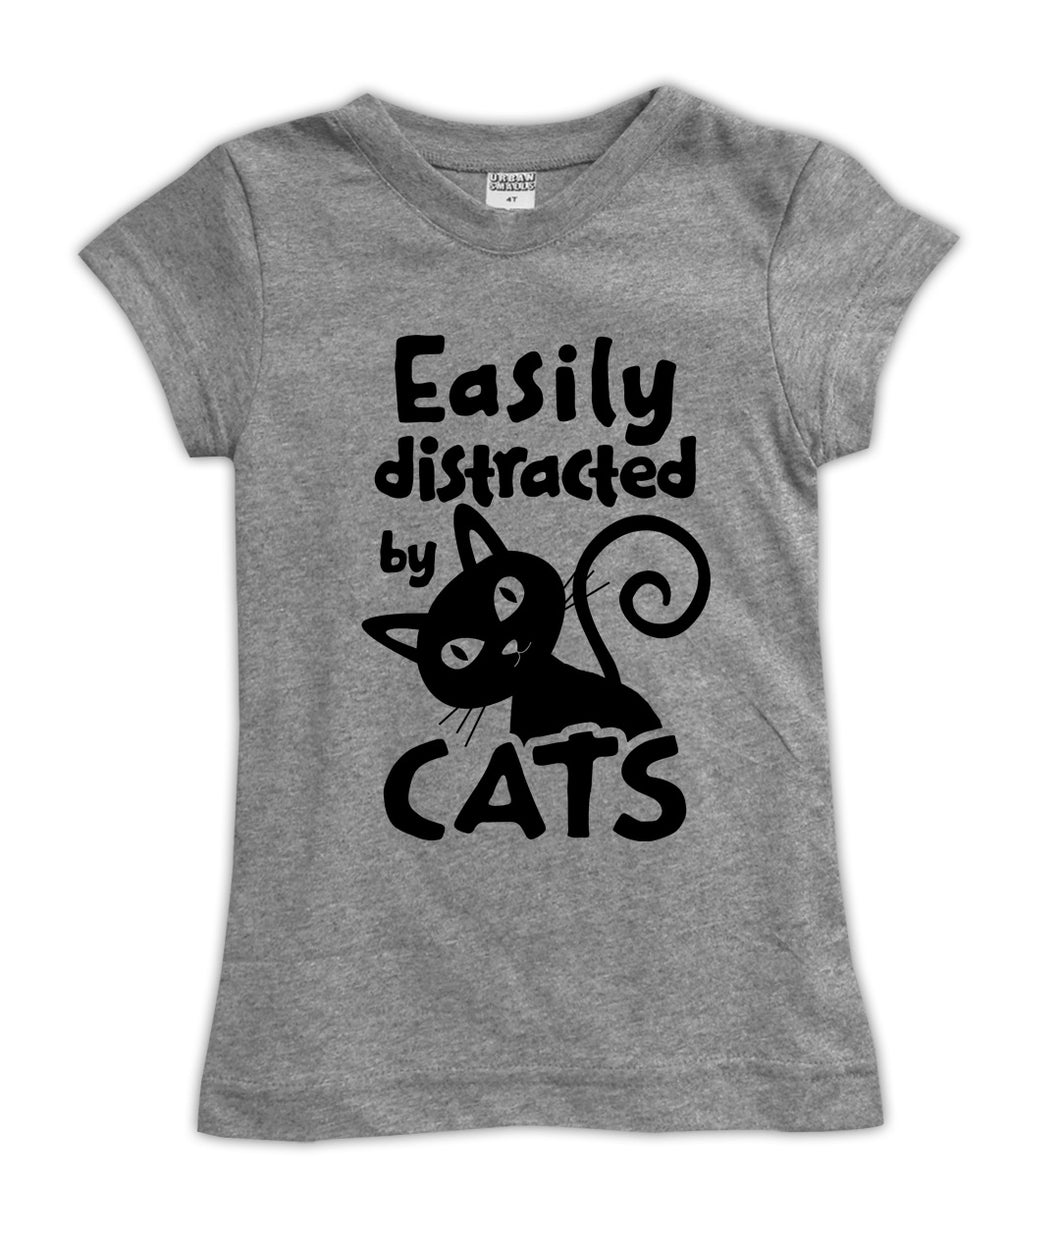 Easily distracted by cats gray girls graphic tee